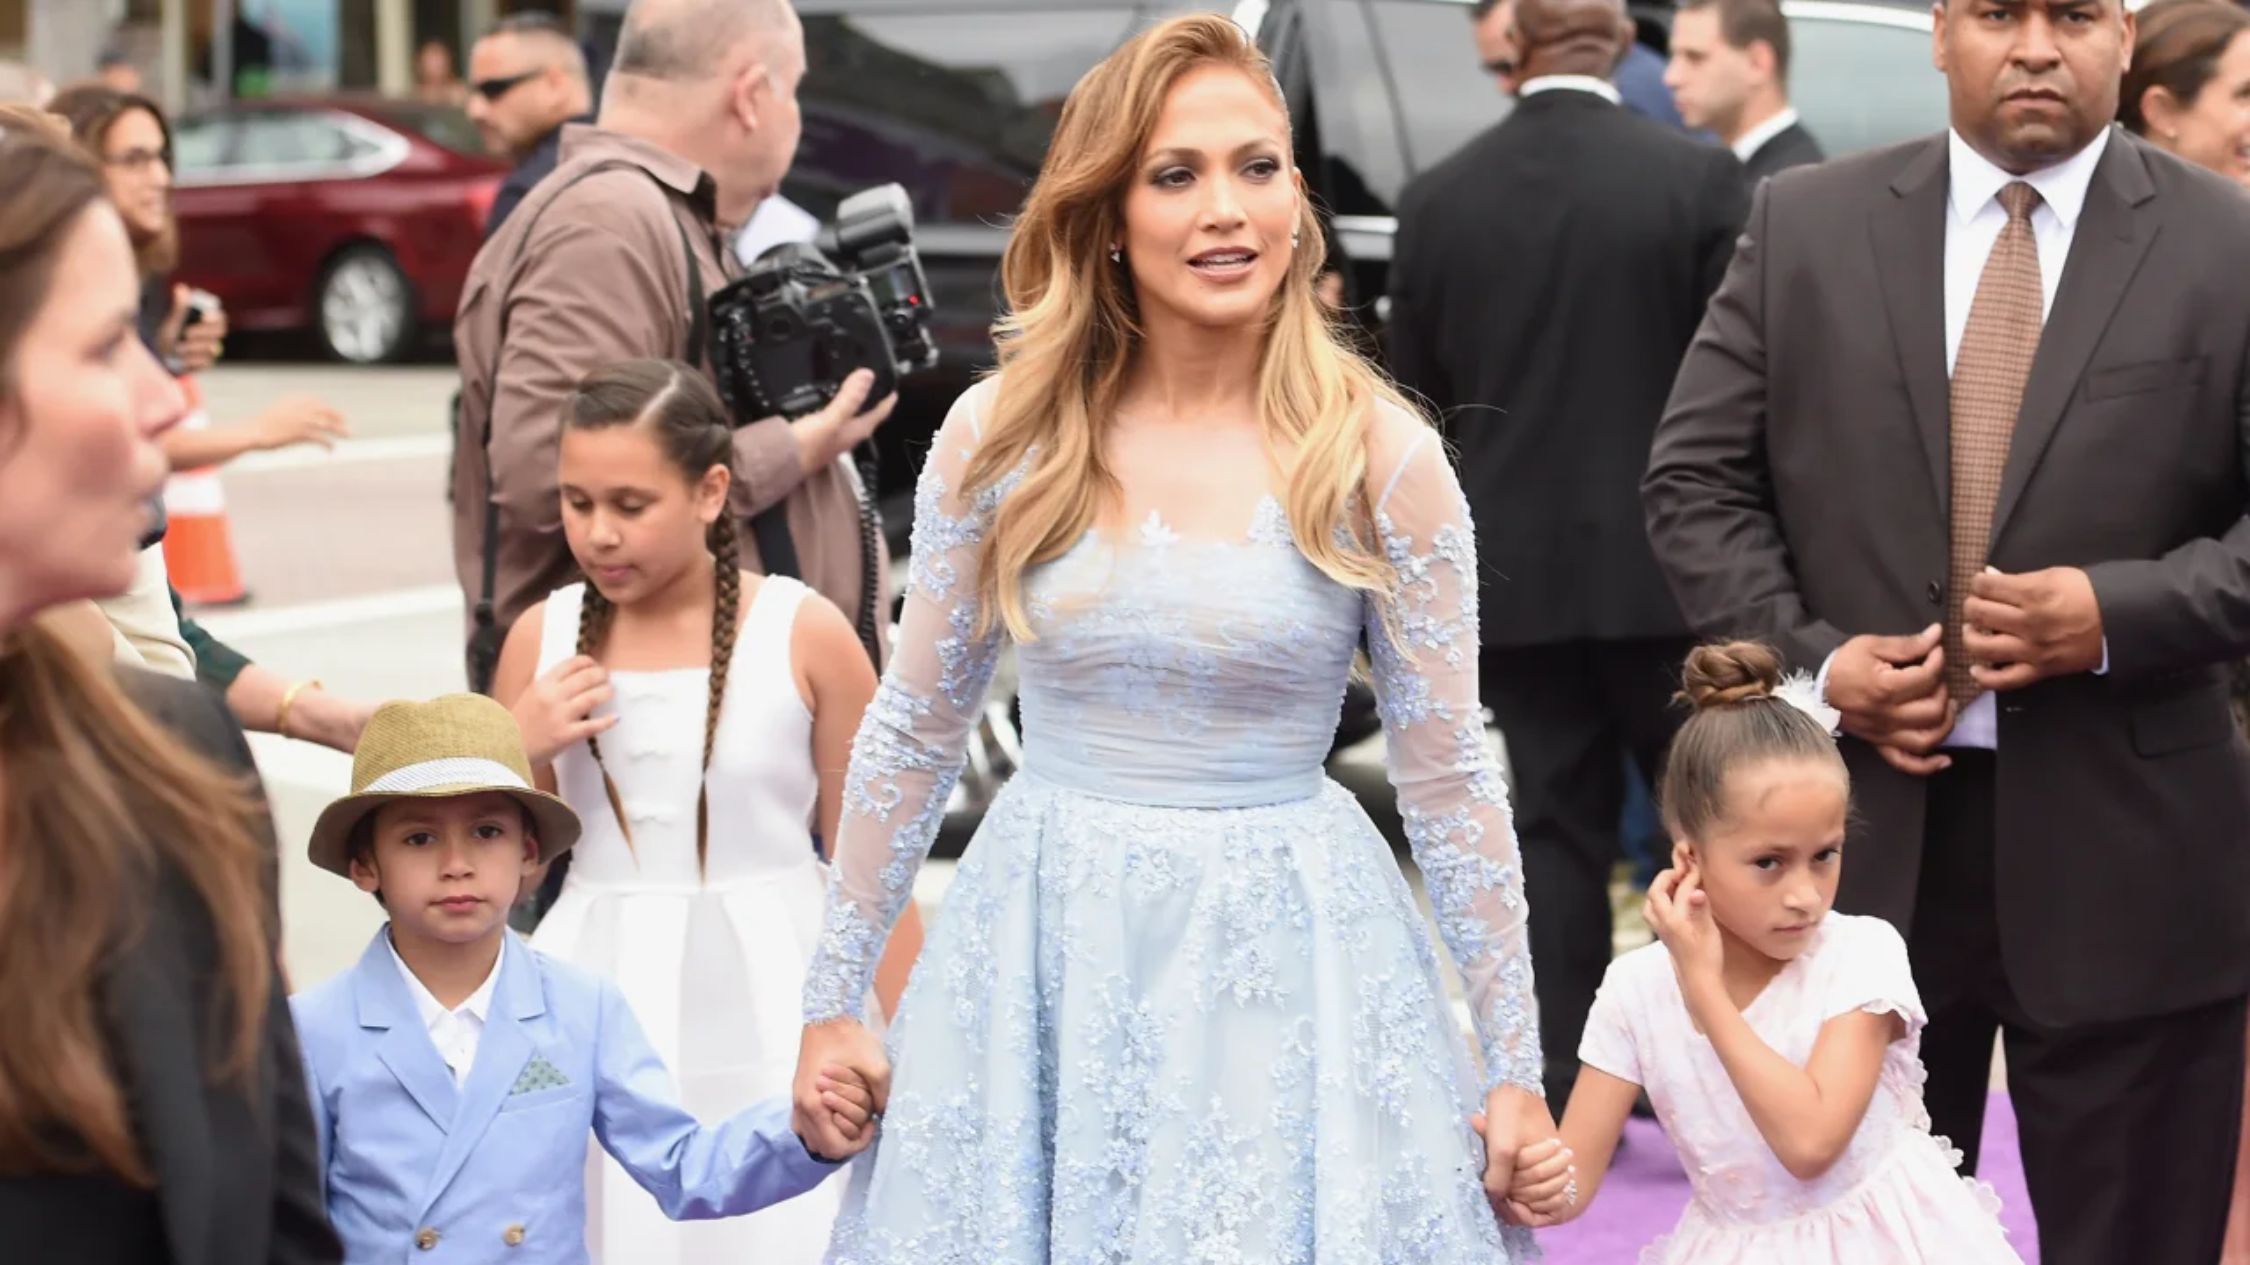 Jennifer Lopez wishes she could protect her children from having famous parents